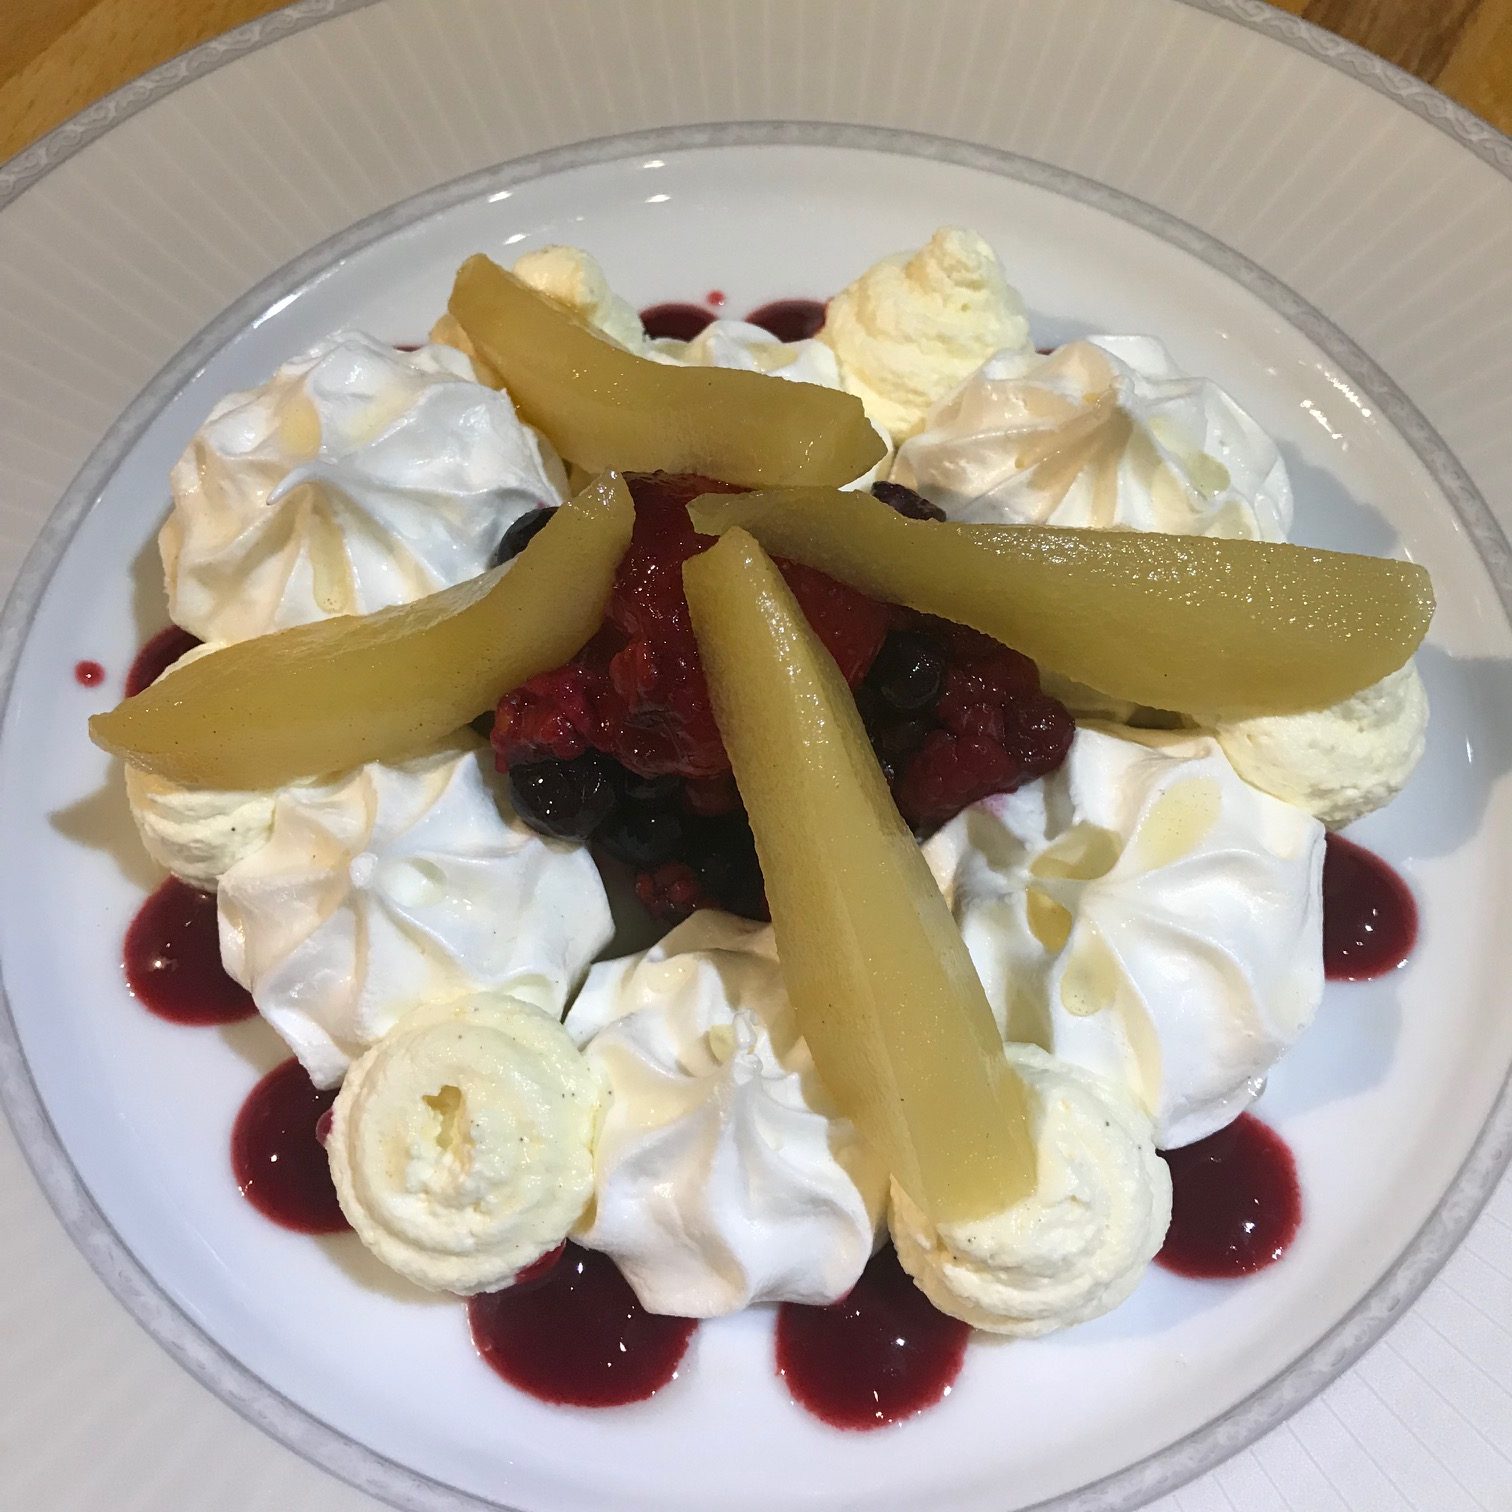 20190830 - Assorted Berry Eaton Mess with Poached Pears